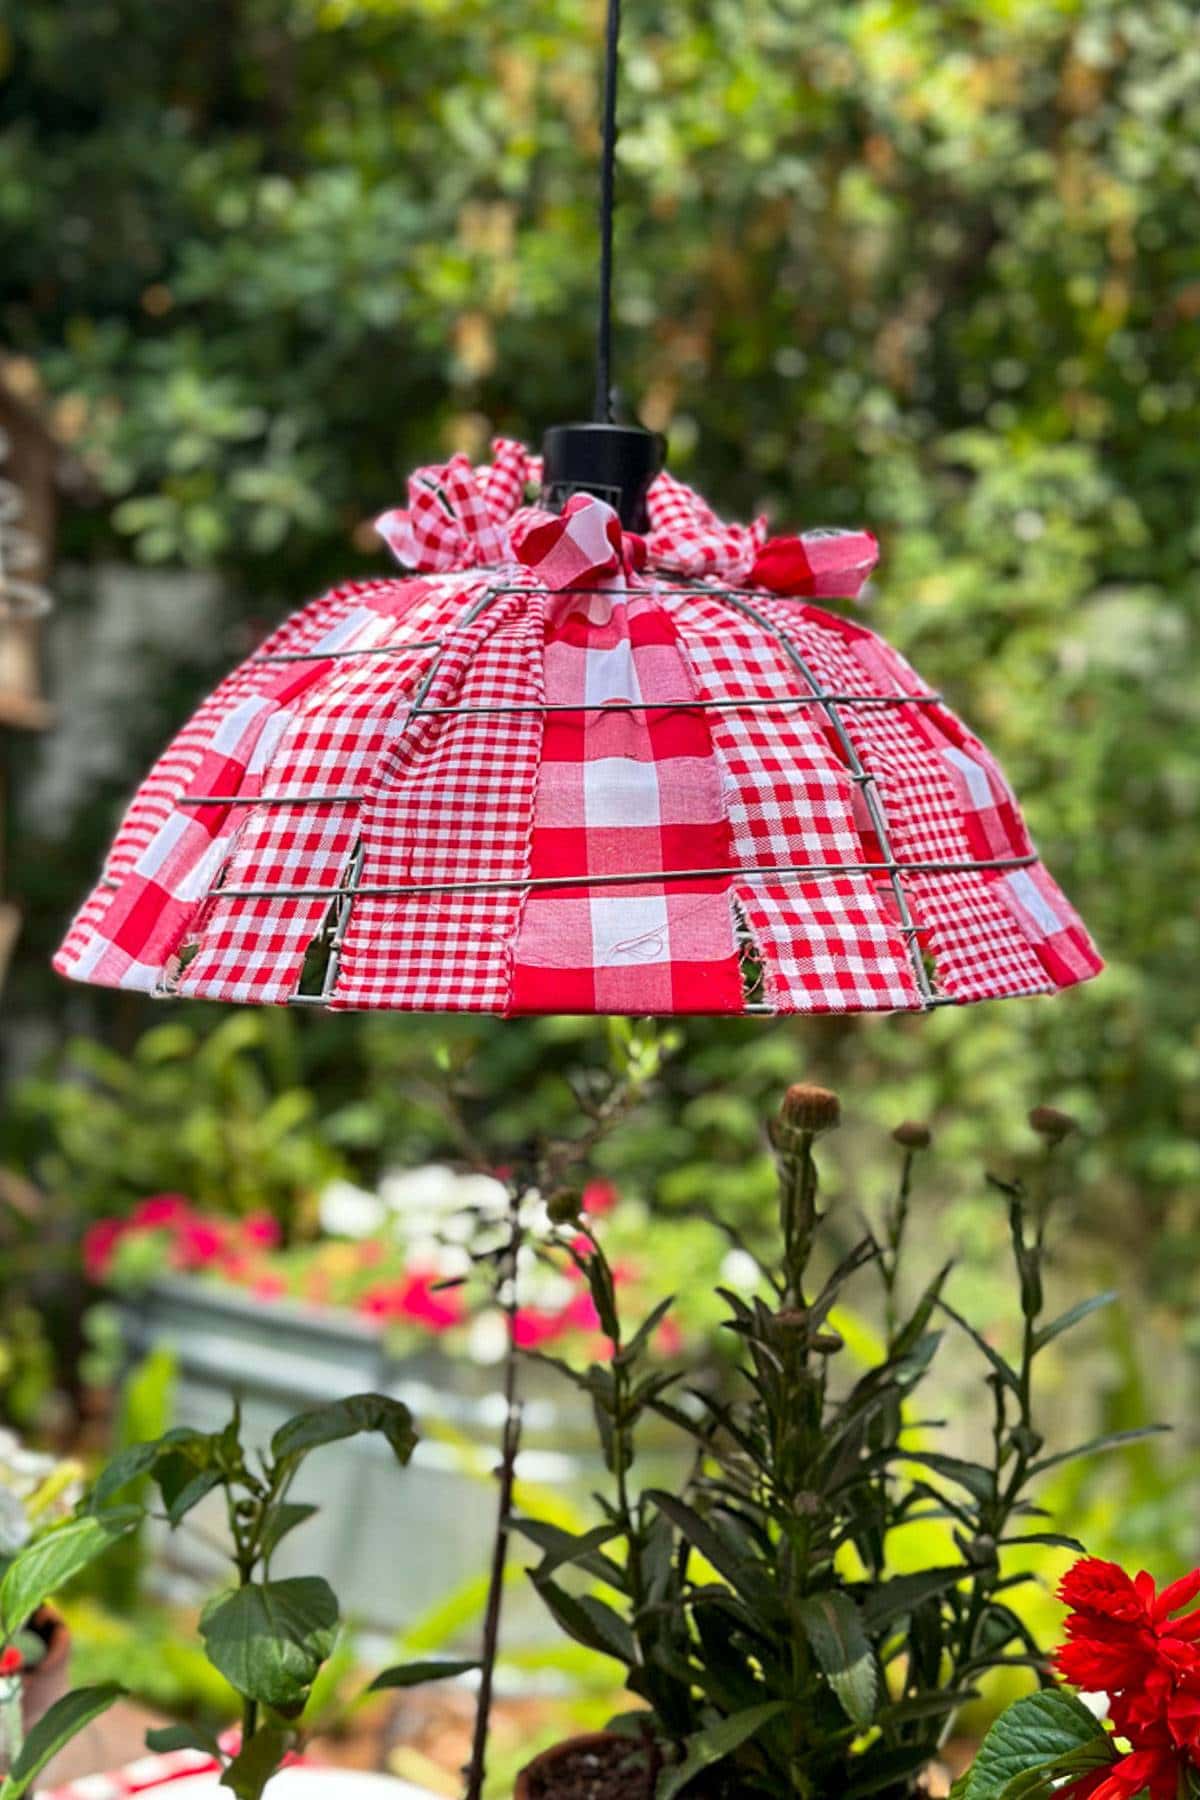 Garden basket light with fabric for outdoor bbq summer tablescape.